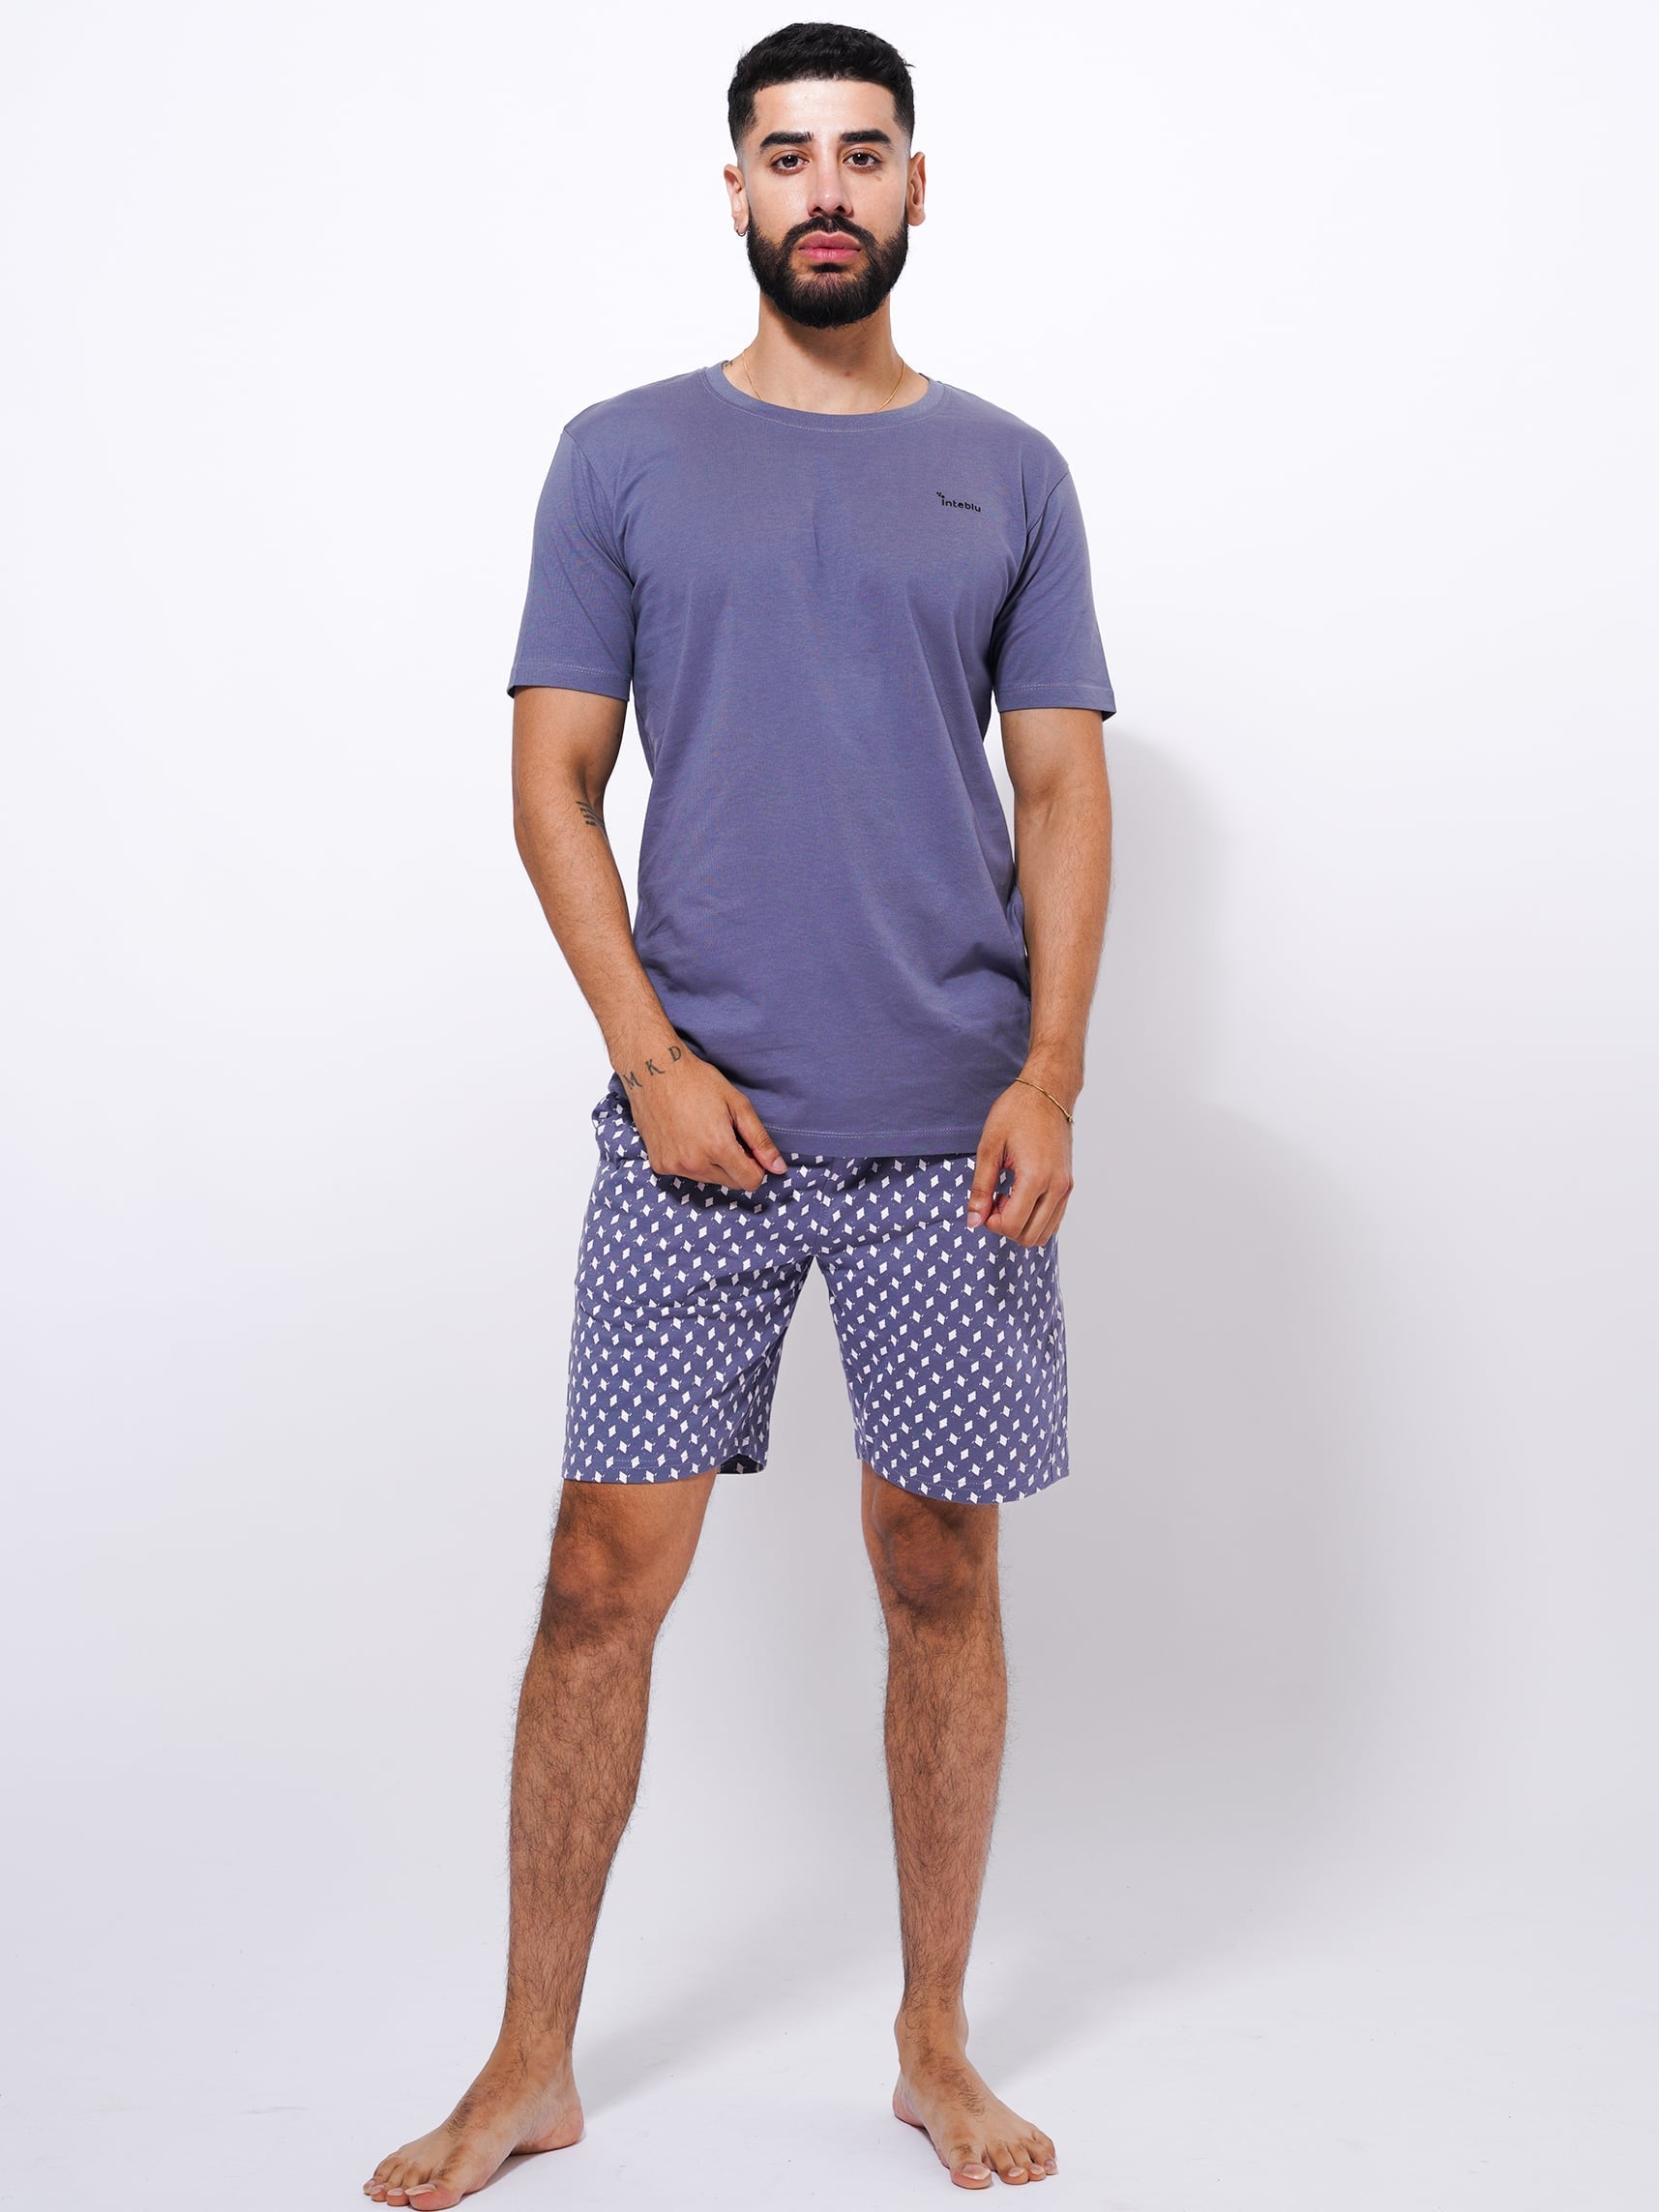 Slim Fit T-Shirt & Shorts Set - Printed Summer Outfit in Folkstone Gray Color - inteblu